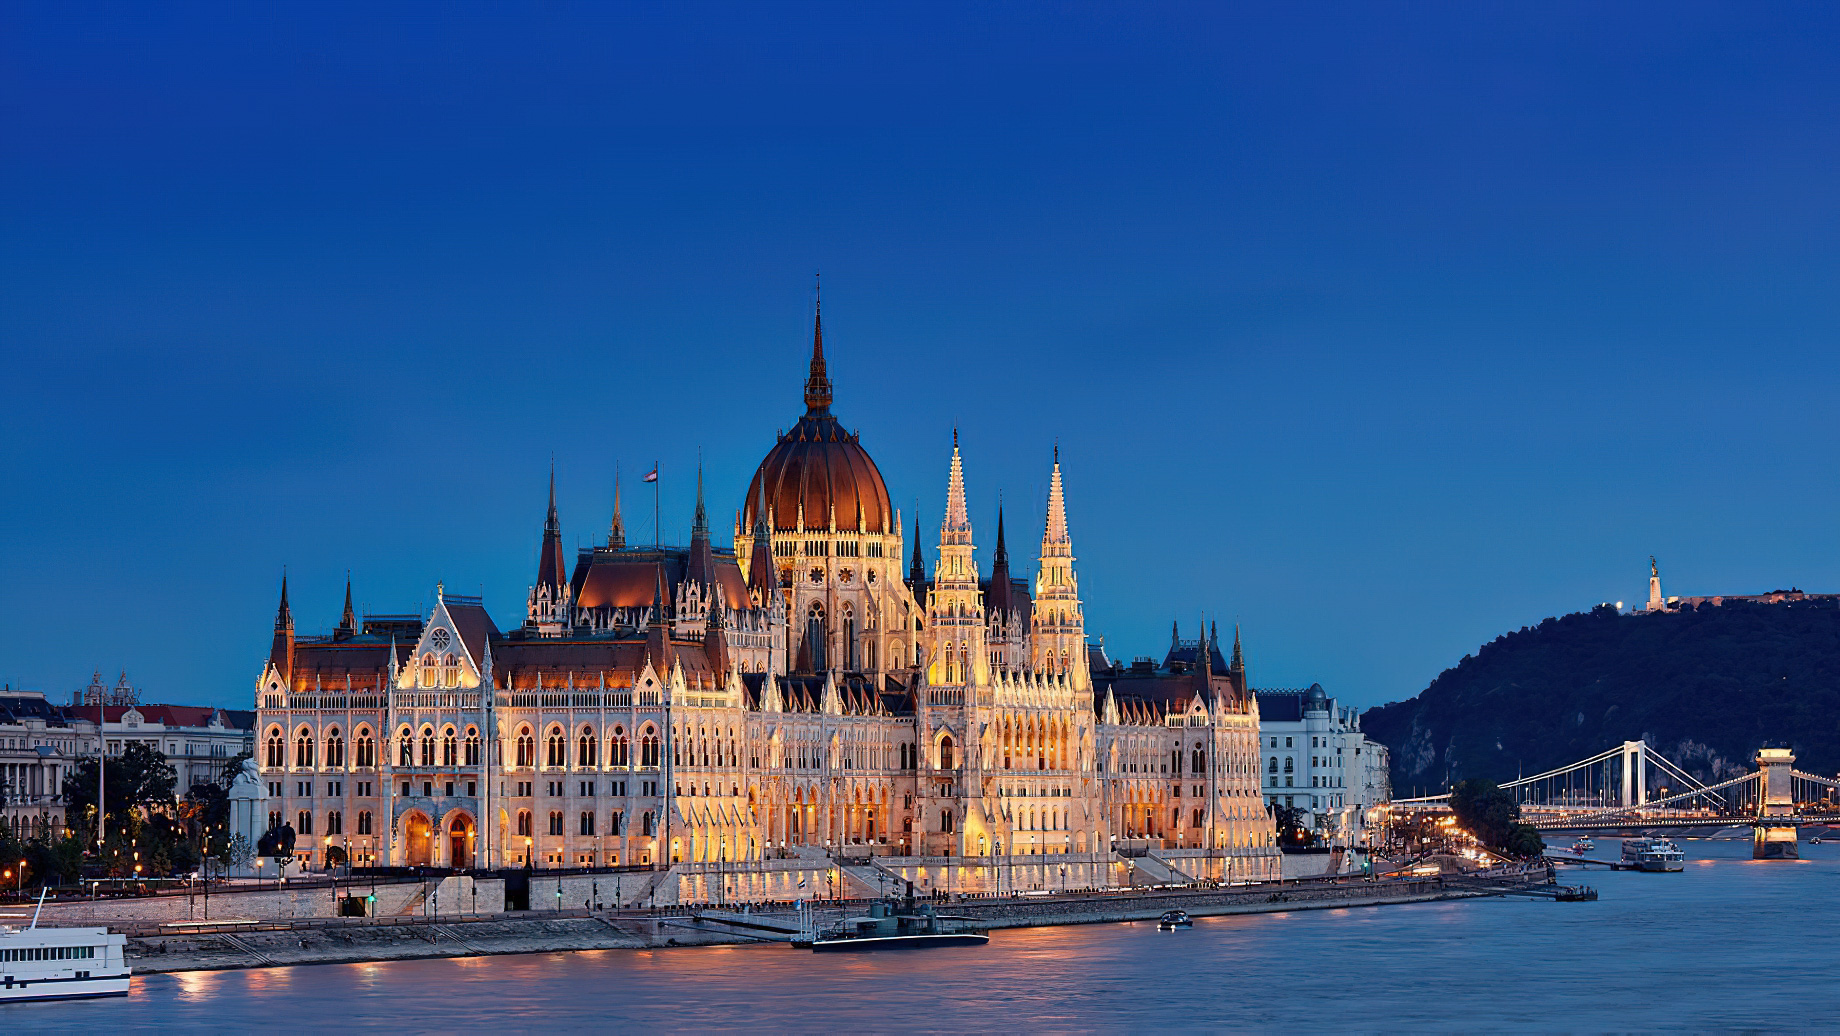 The Ritz-Carlton, Budapest Hotel - Budapest, Hungary - Parliment Building Night River View